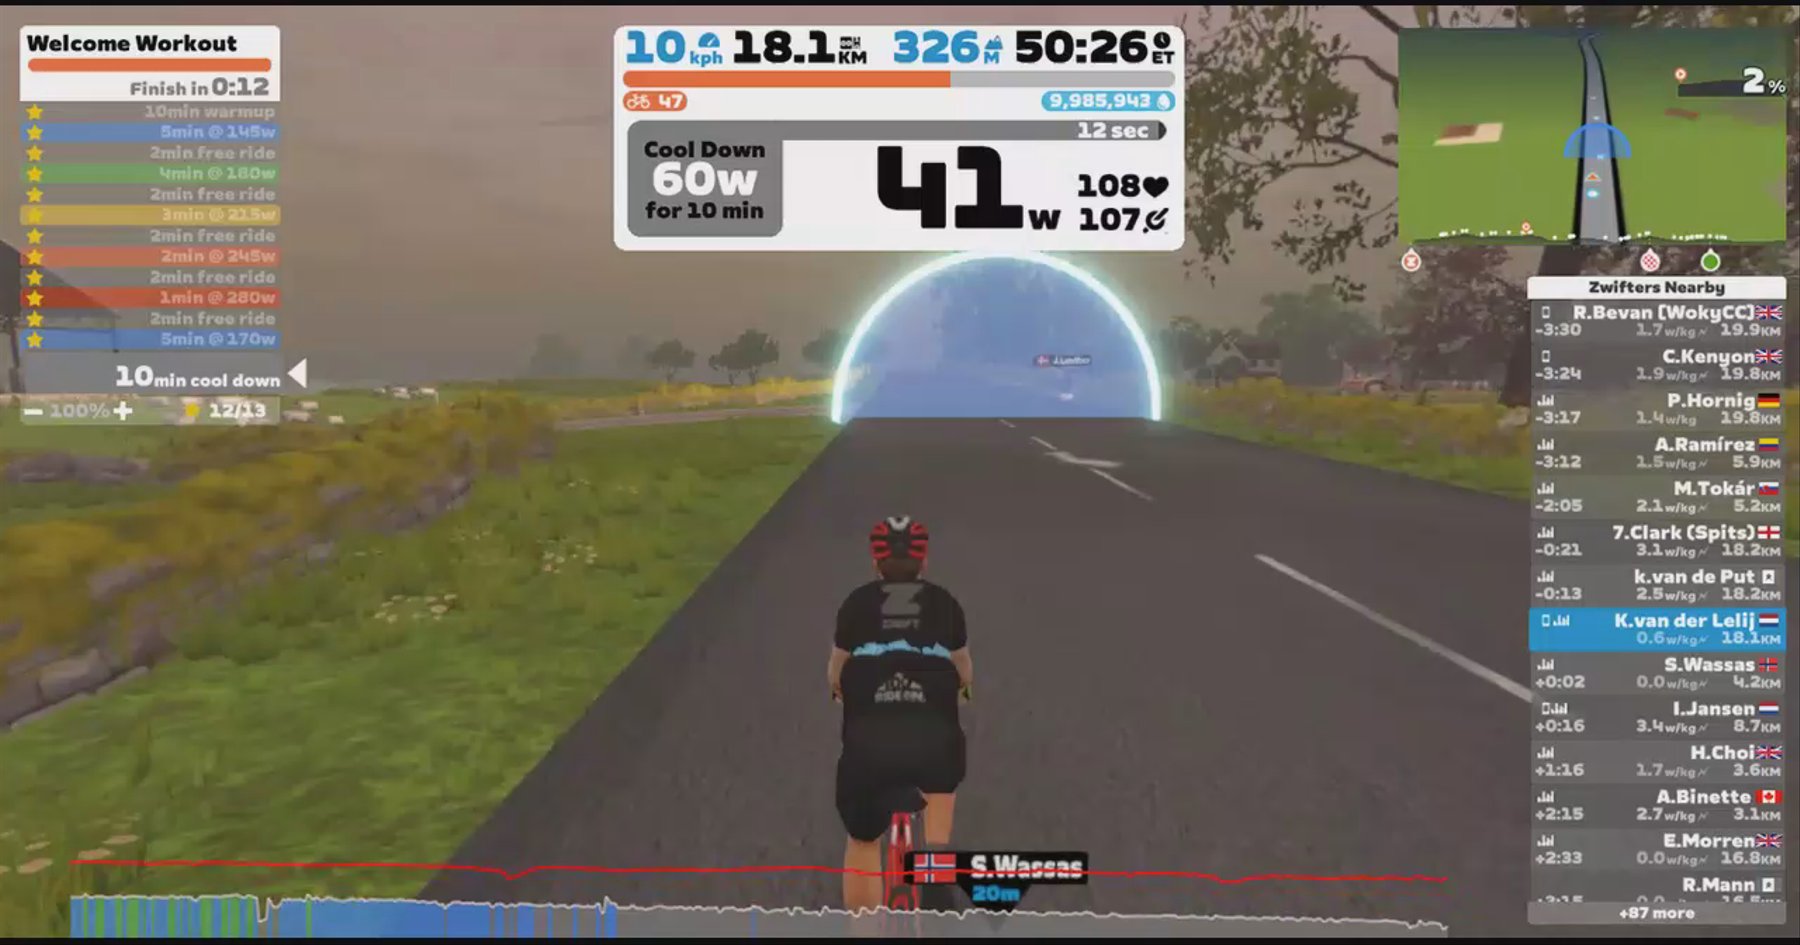 Zwift - Welcome Workout in Yorkshire